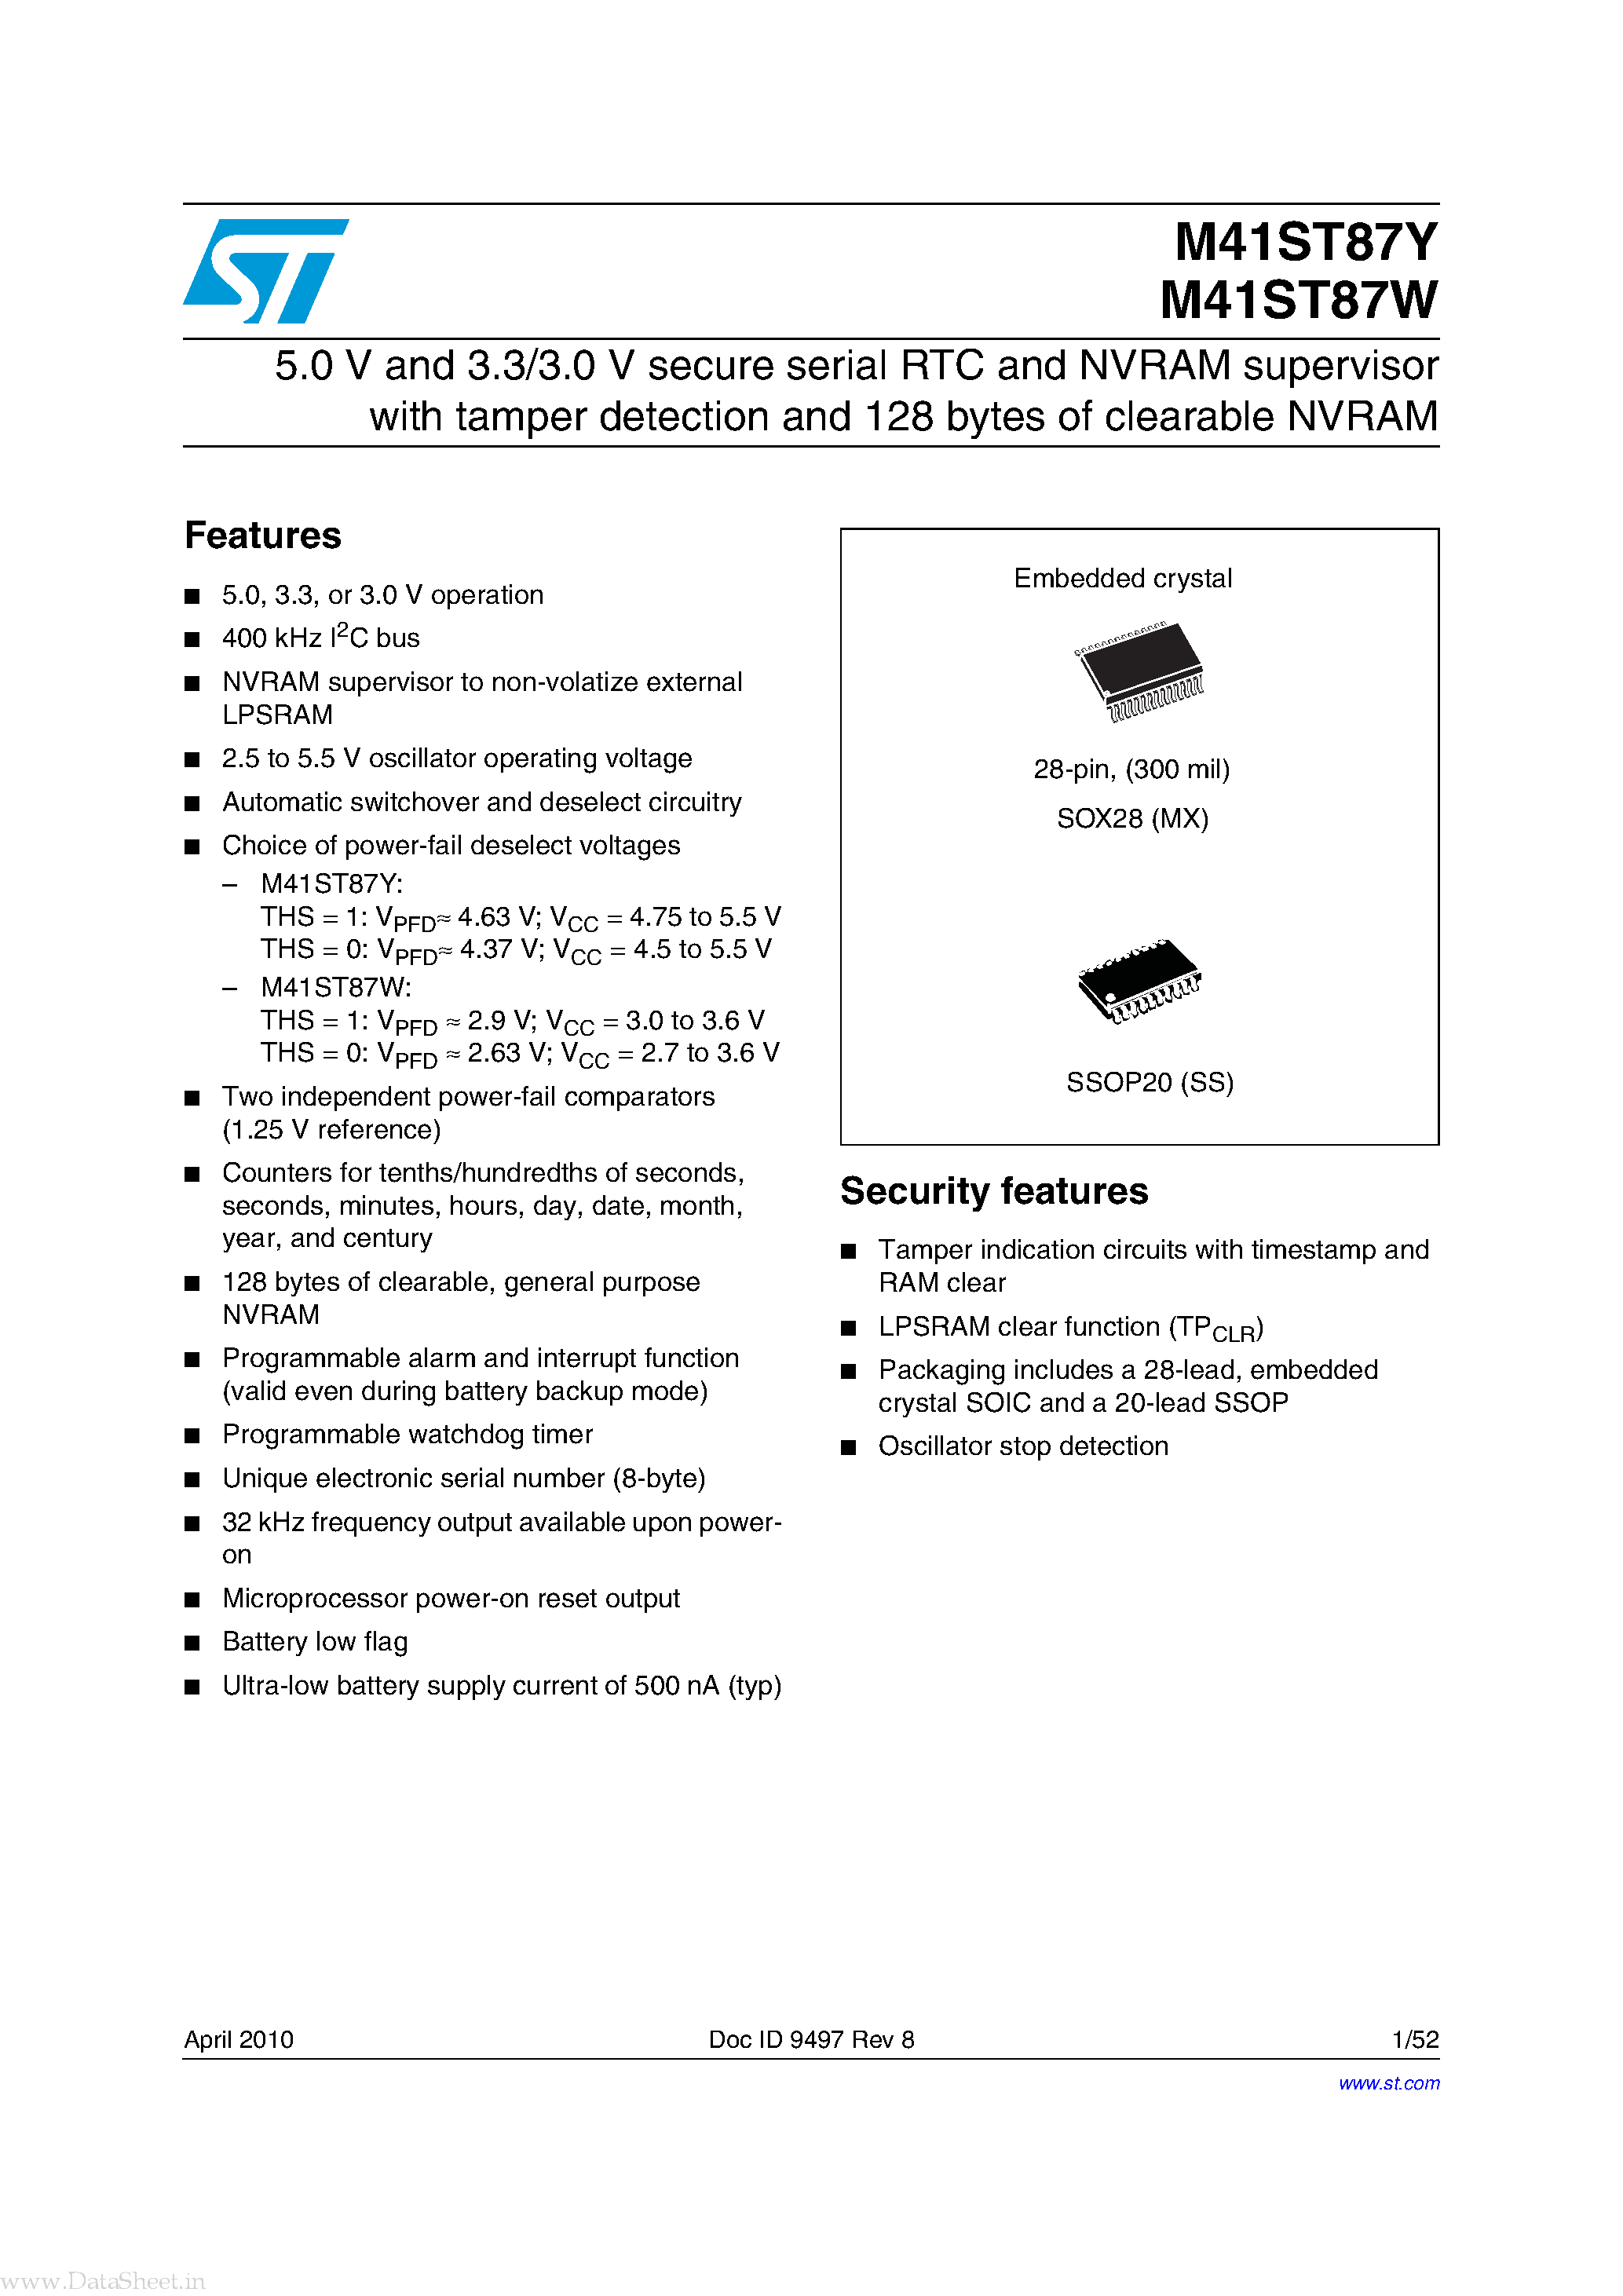 Datasheet M41ST87W - 5.0 V and 3.3/3.0 V secure serial RTC and NVRAM supervisor page 1